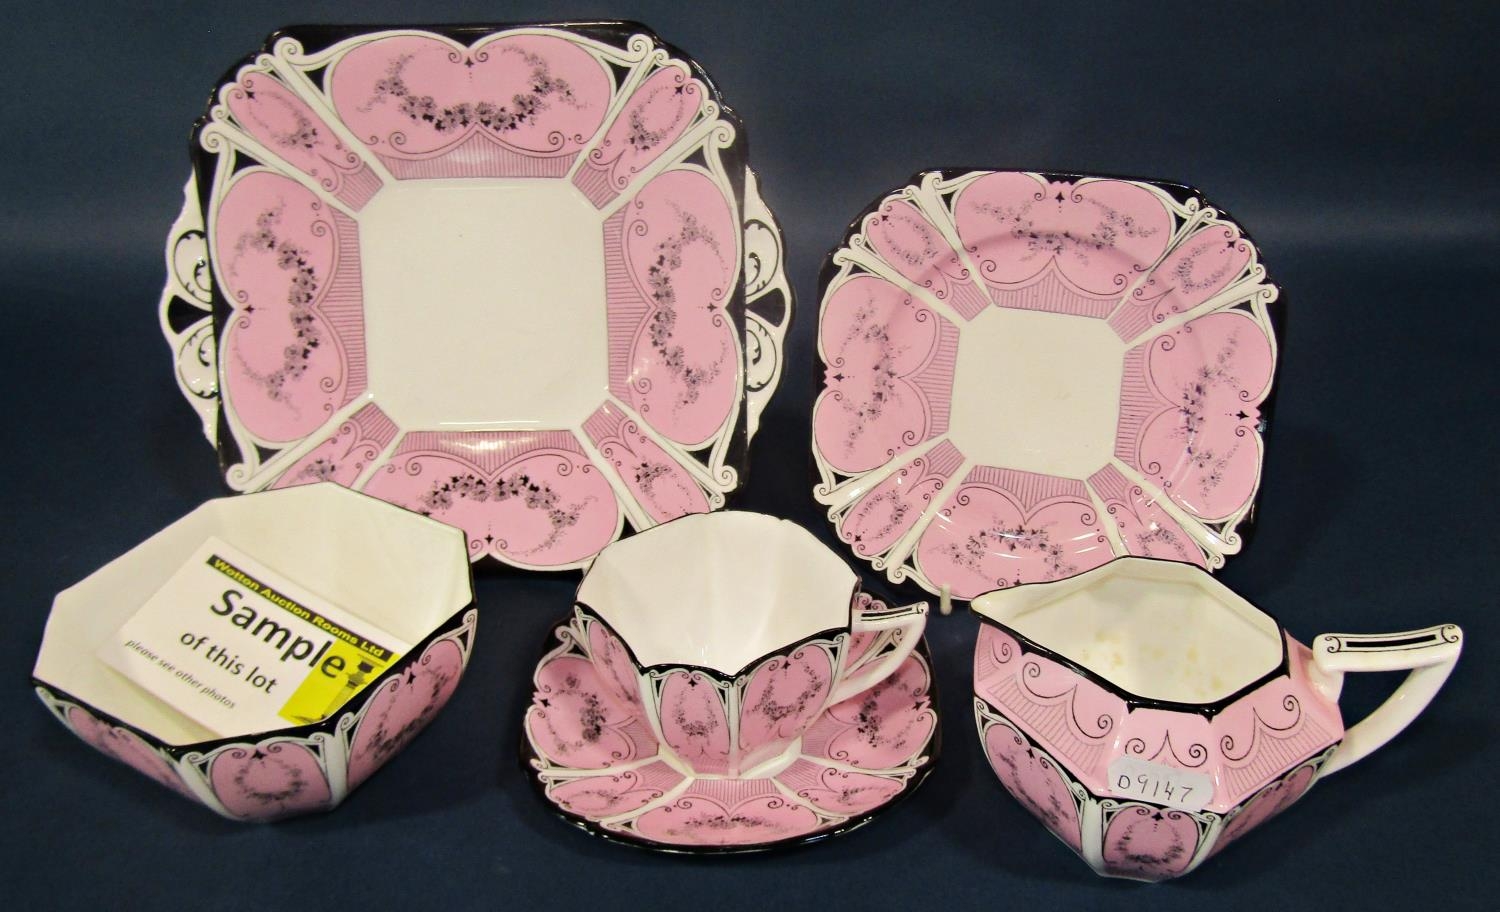 A Shelley Garland of Flowers Queen Ann shaped tea service for 12 in a pink, black and white